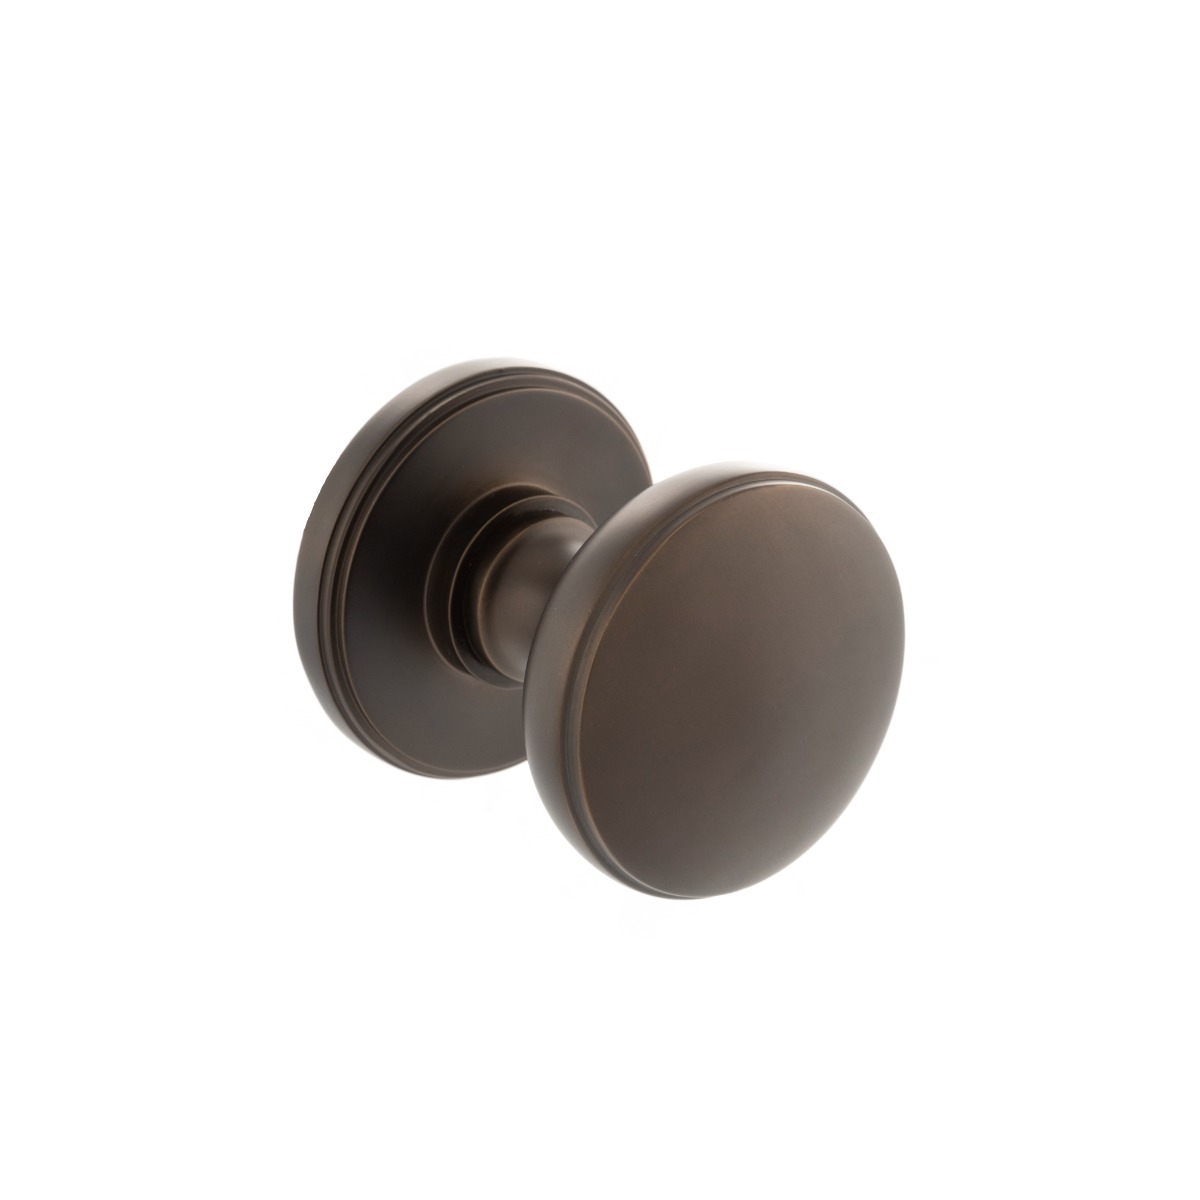 Millhouse Brass Edison Solid Brass Domed Mortice Knob on Concealed Fix Rose - Urban Dark Bronze MH400DMKUDB